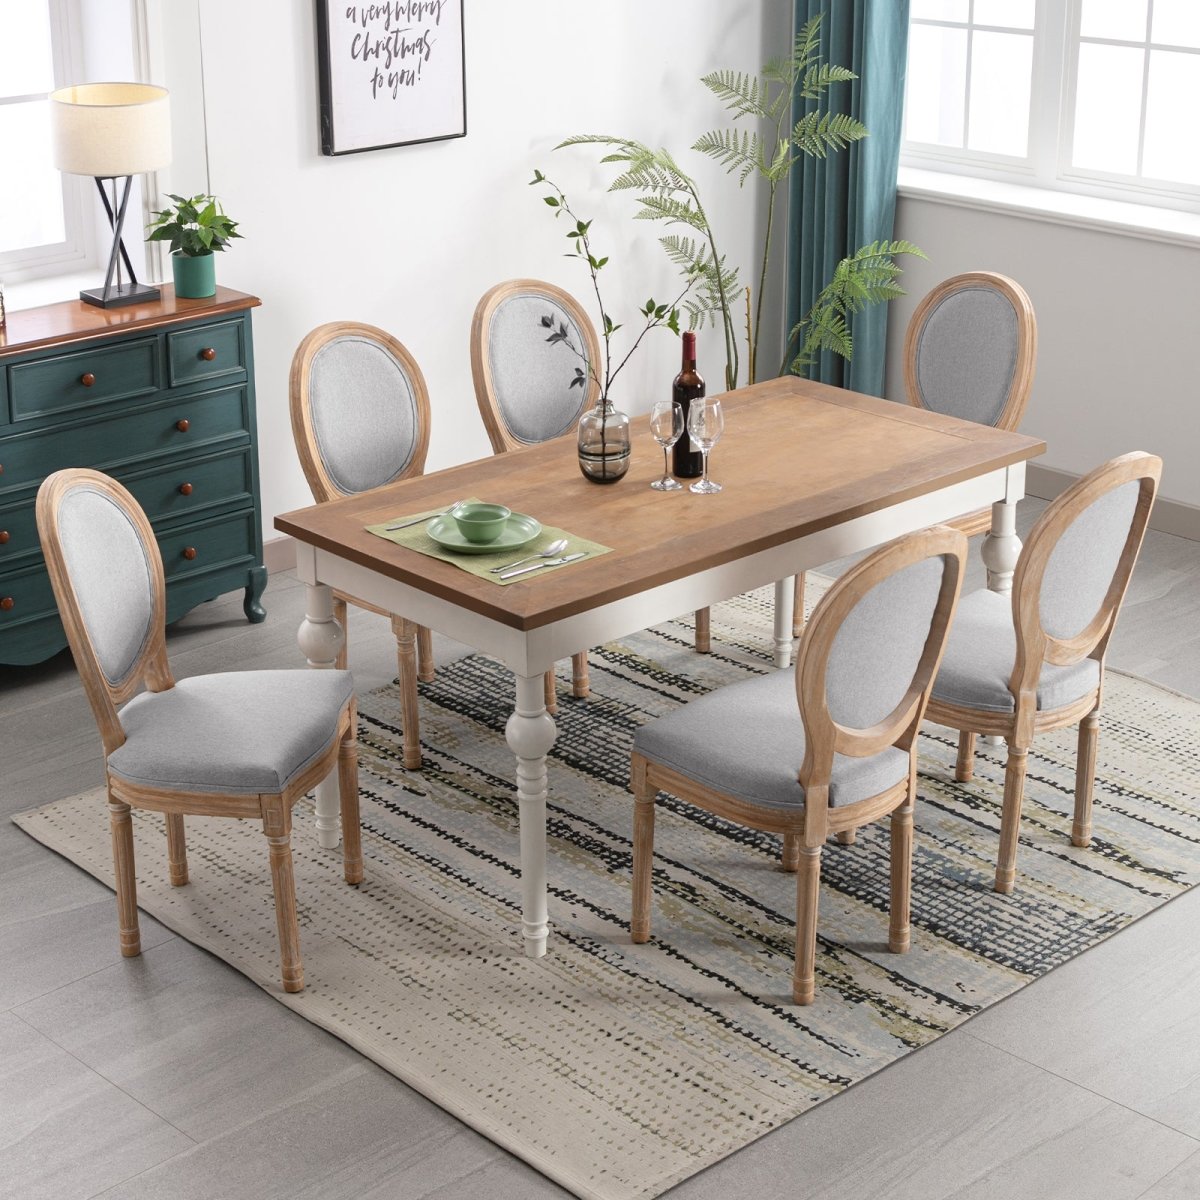 Dining Chairs | Retro Wooden Upholstered Dining Chair Set with Padded Cushion - Mjkonechair